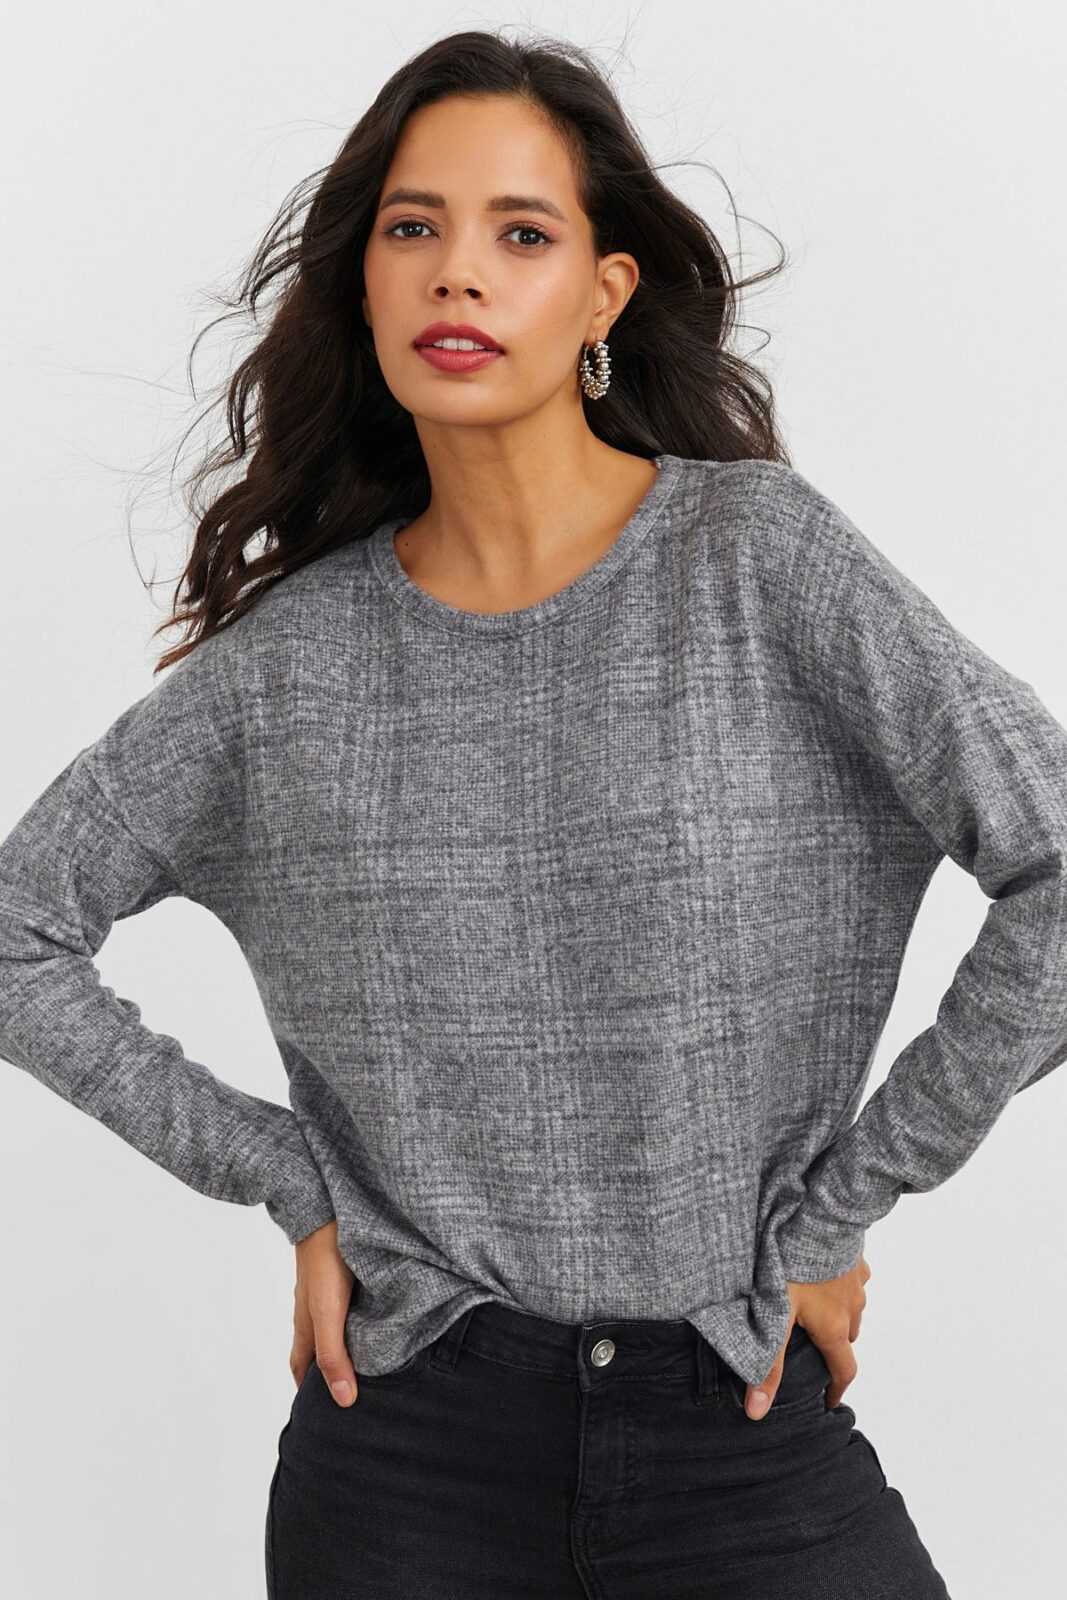 Cool & Sexy Blouse - Gray